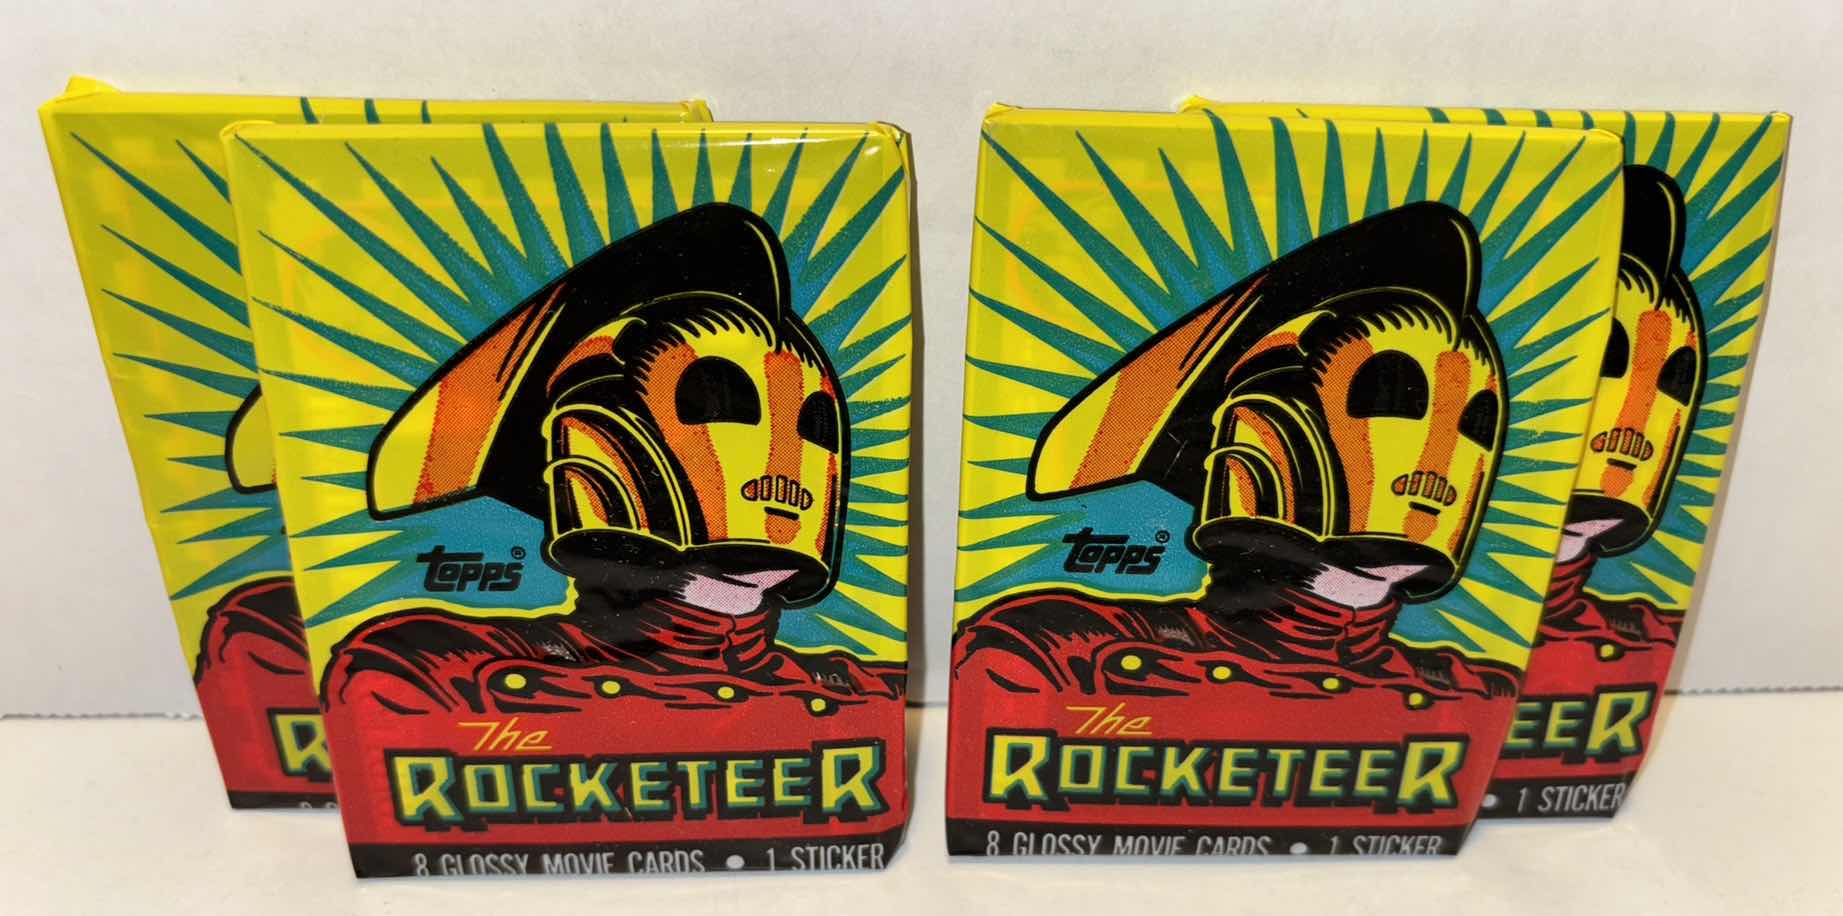 Photo 1 of NEW 4-PACK VINTAGE TOPPS 1991 COLLECTIBLE TRADING CARDS, 8 CT GLOSSY MOVIE CARDS W STICKER, “DELUXE THE ROCKETEER”